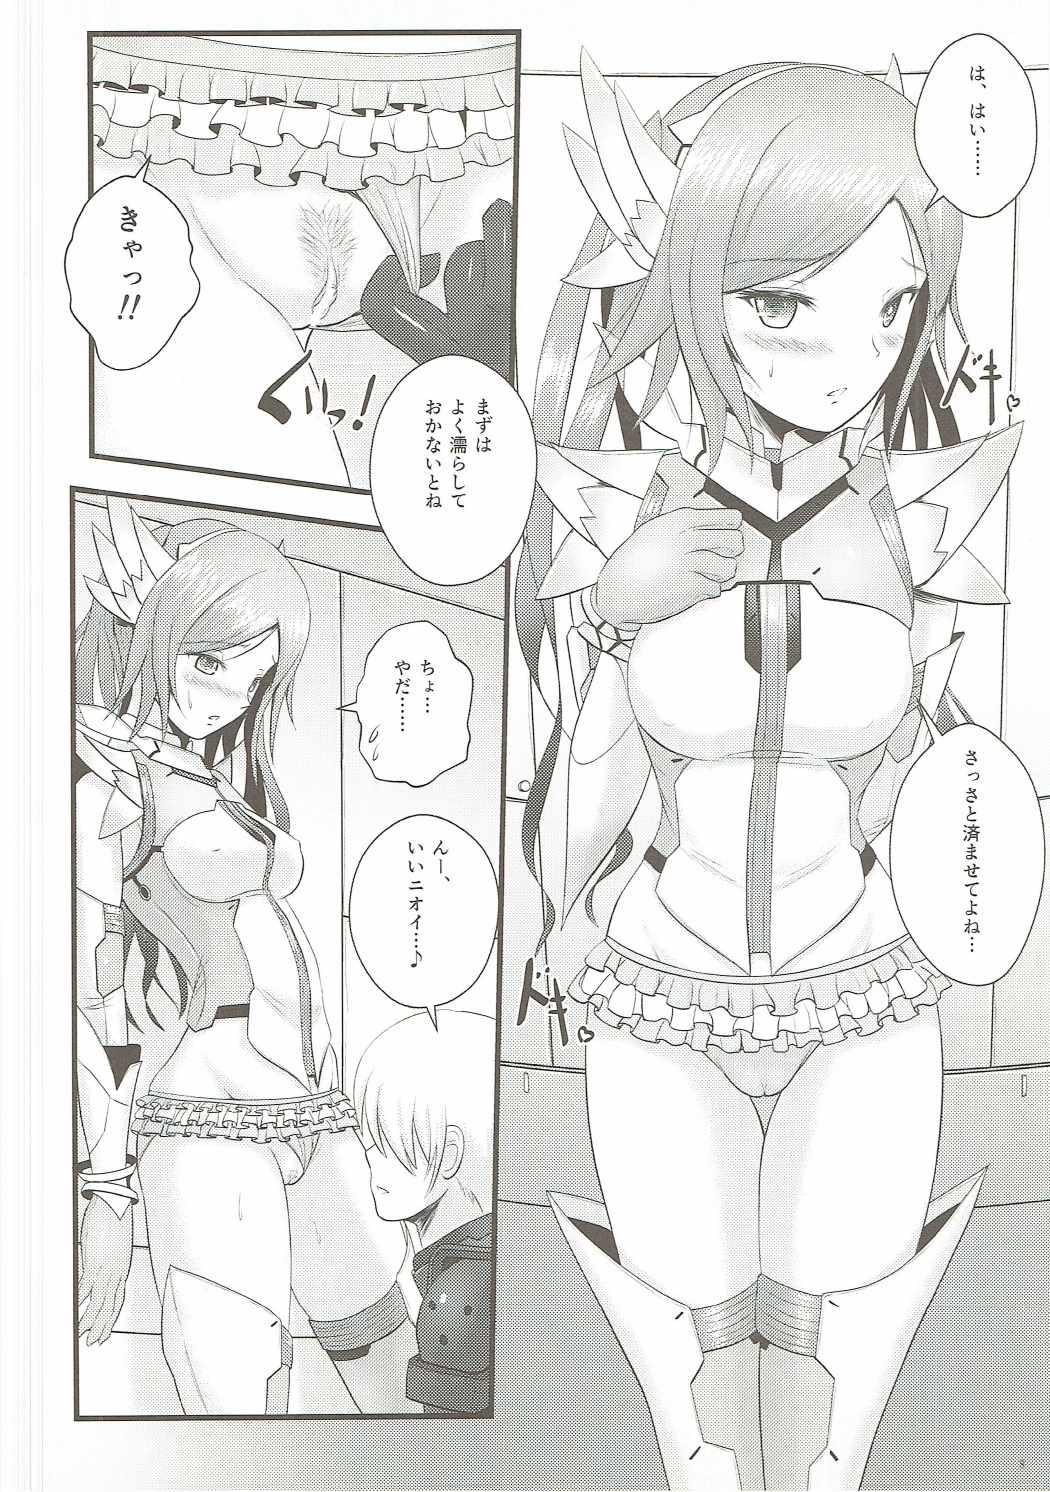 Private Seagull's Love Song - Phantasy star online 2 Massive - Page 5